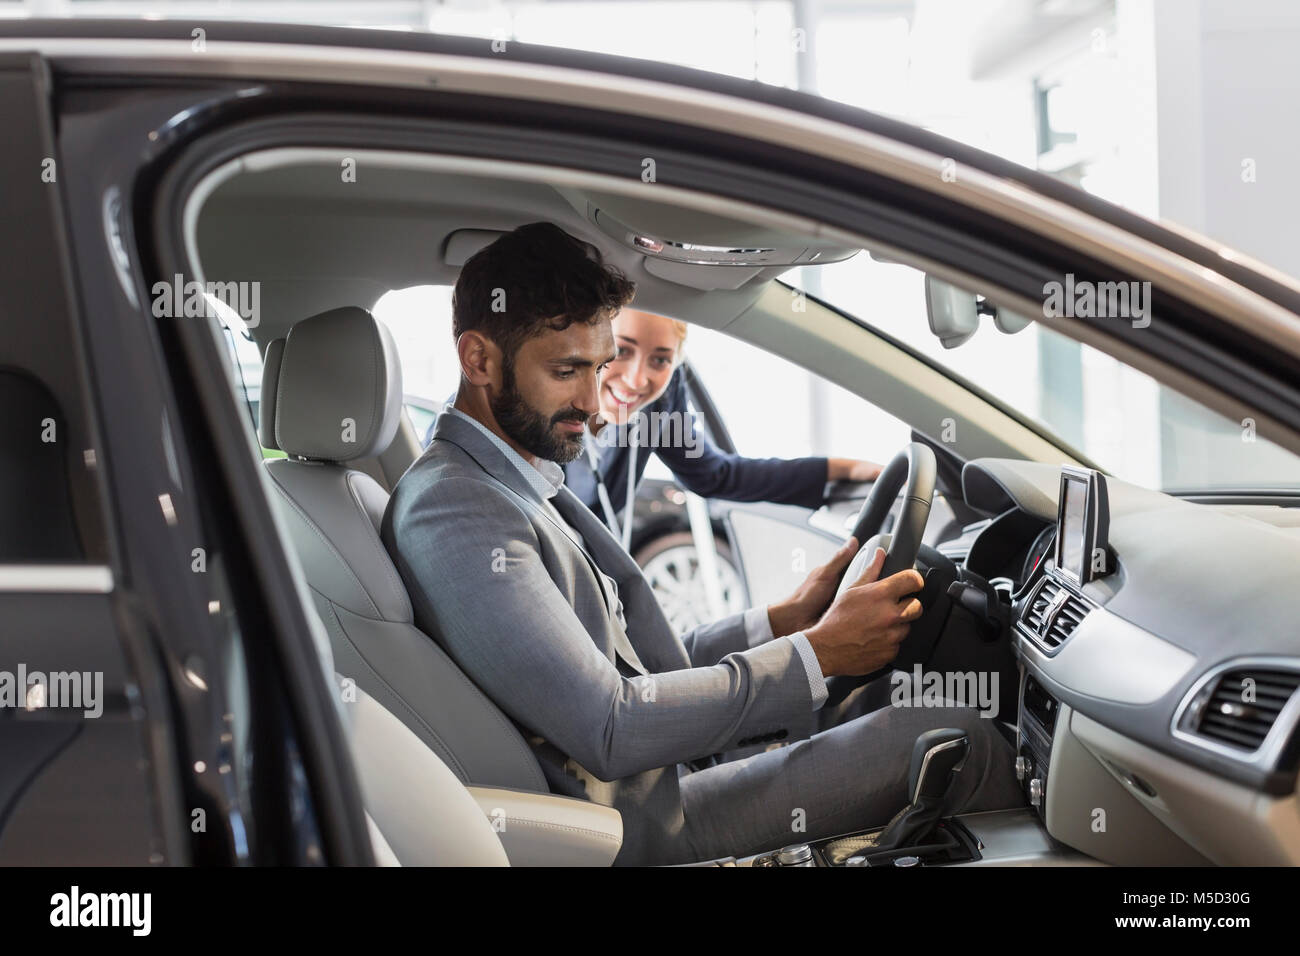 Car saleswoman and male customer in driver’s seat of new car in car dealership showroom Stock Photo